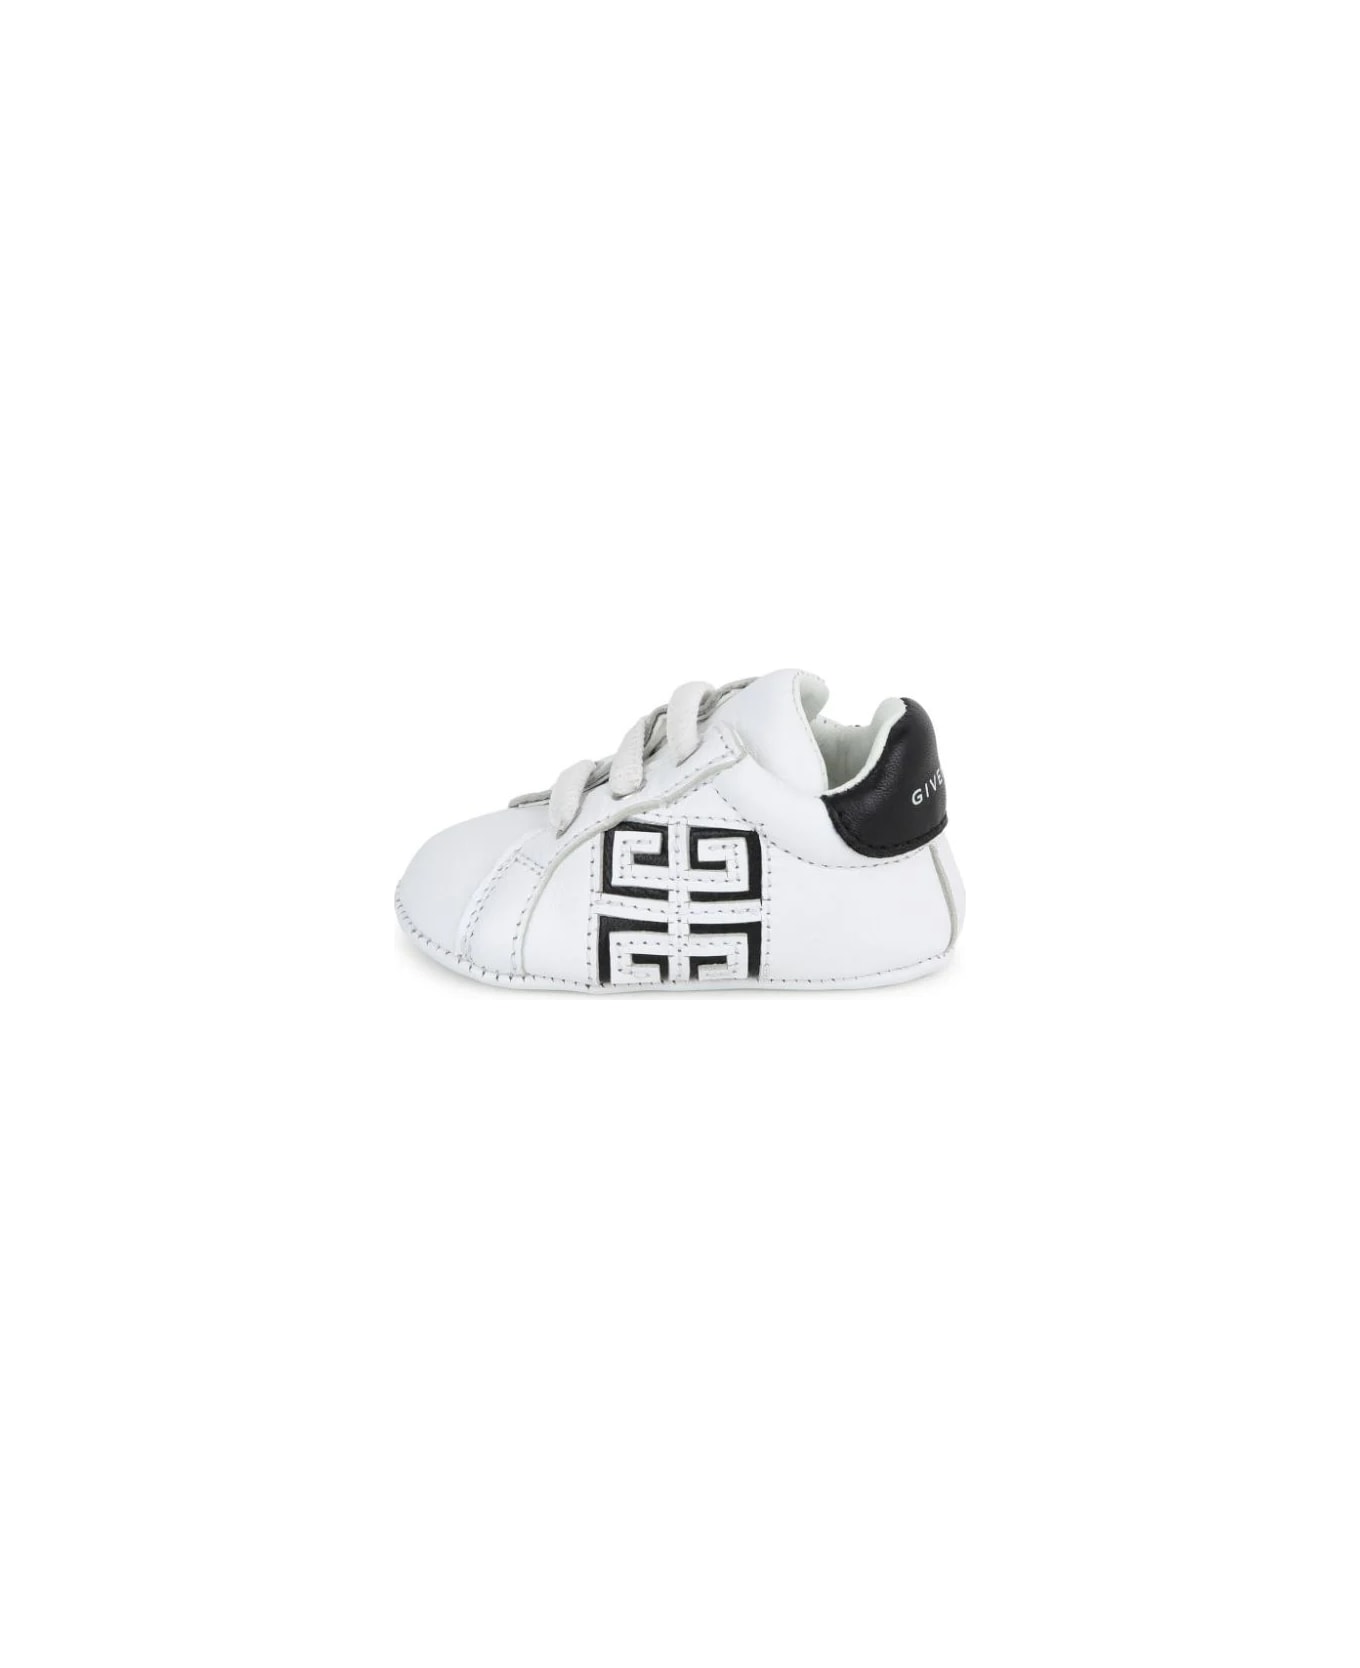 Givenchy White And Black 4g Sneakers - White シューズ